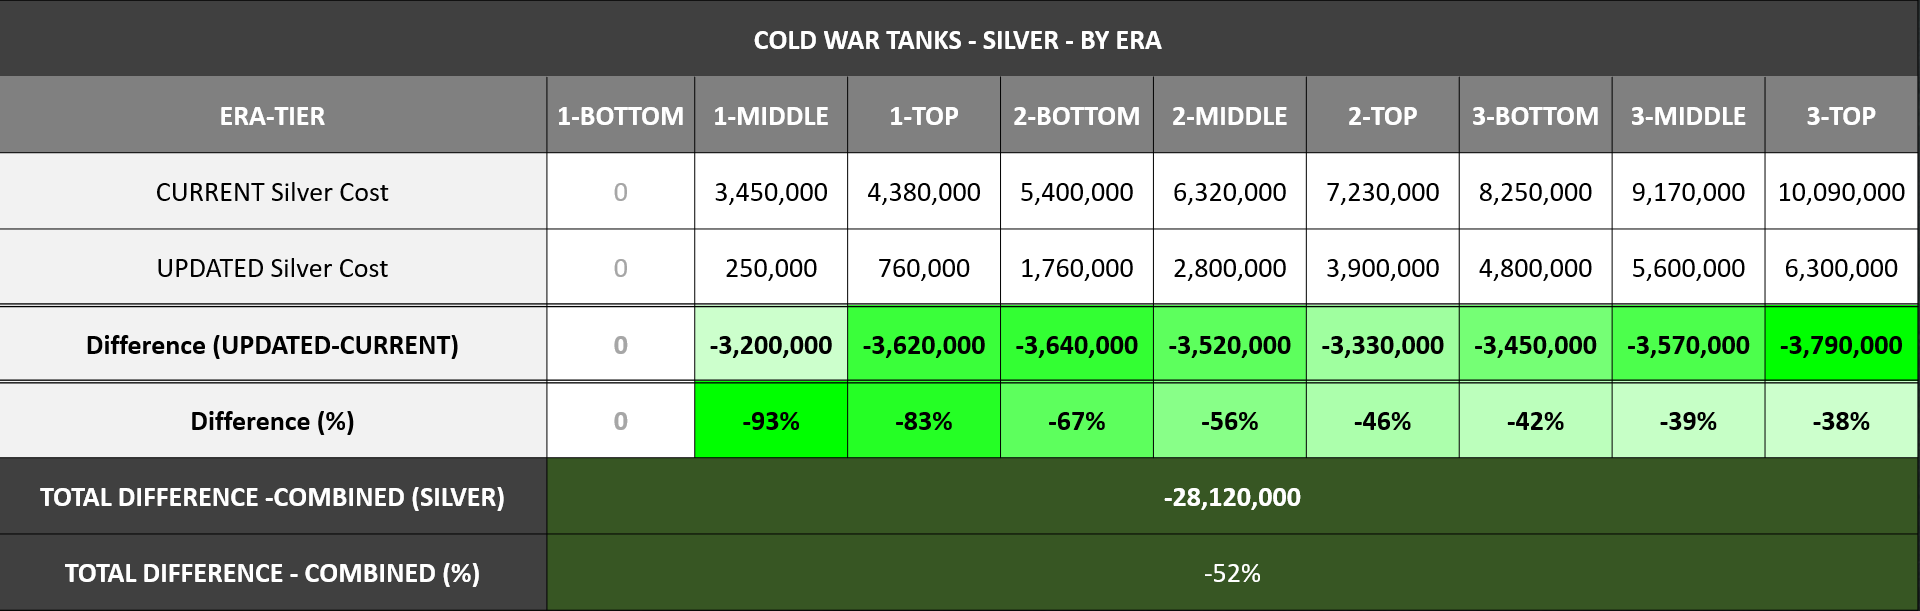 CW Earn Changes - Slide 10 Chart - Tank Silver Costs_V2